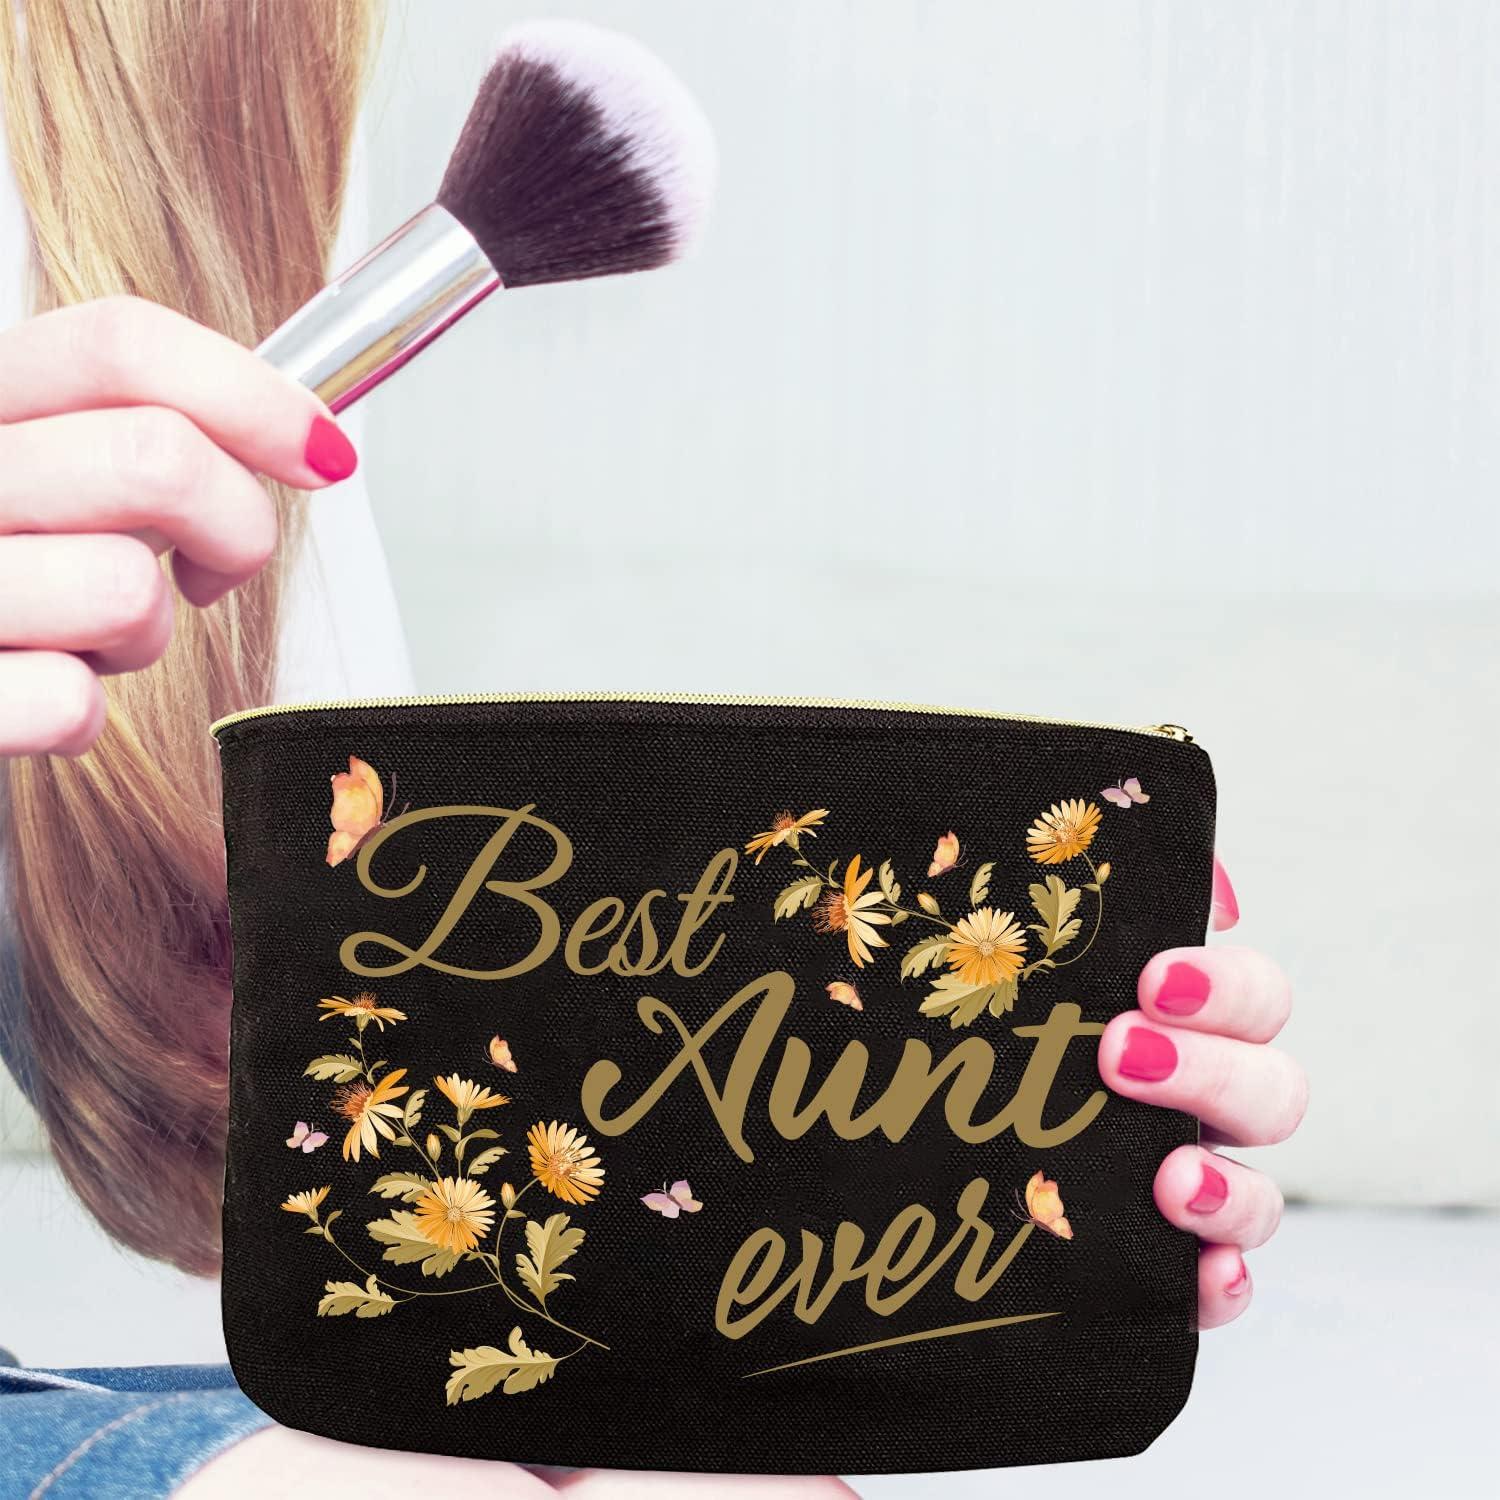 You Have Been Loved For 14 Years - 14th Birthday Gift Makeup Bag - 14 Year  Old Birthday Gifts Cosmetic Bags - Cute 14th Birthday Gift For Her- Sister